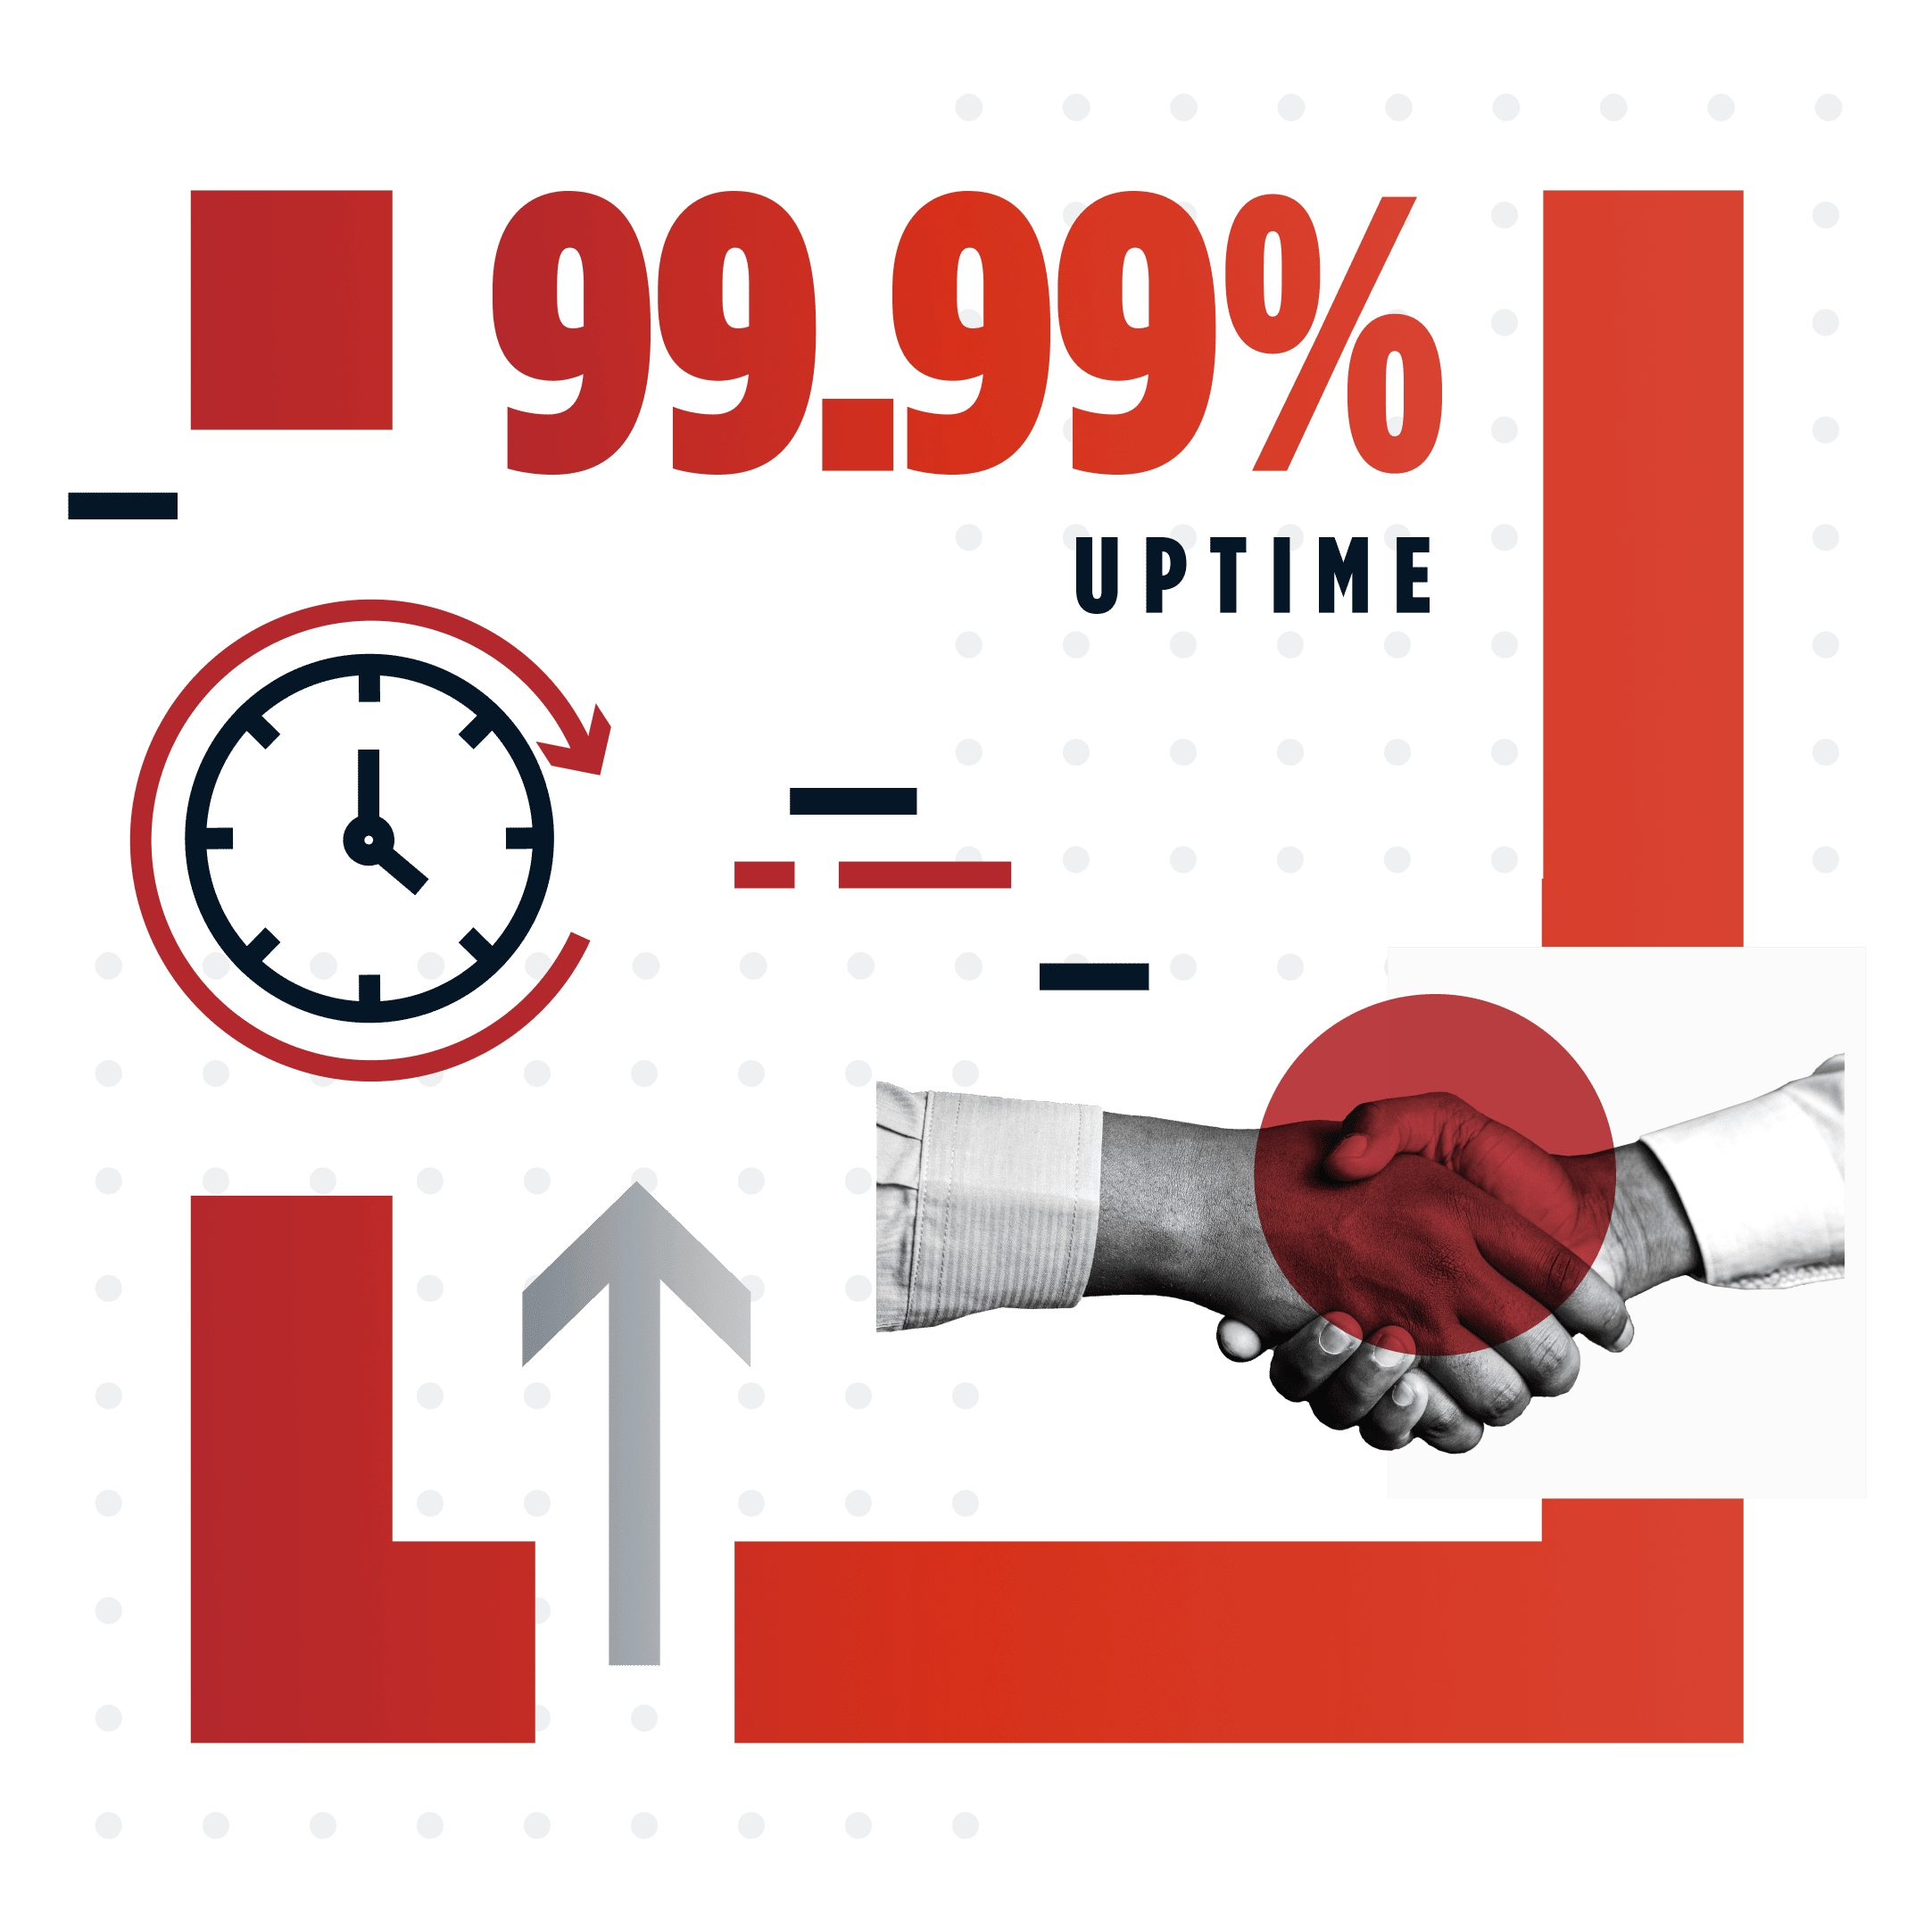 Decorative graphic containing an image of two hands shaking with the words '99.99% uptime' at the top and a clock and up arrow icon representing it.